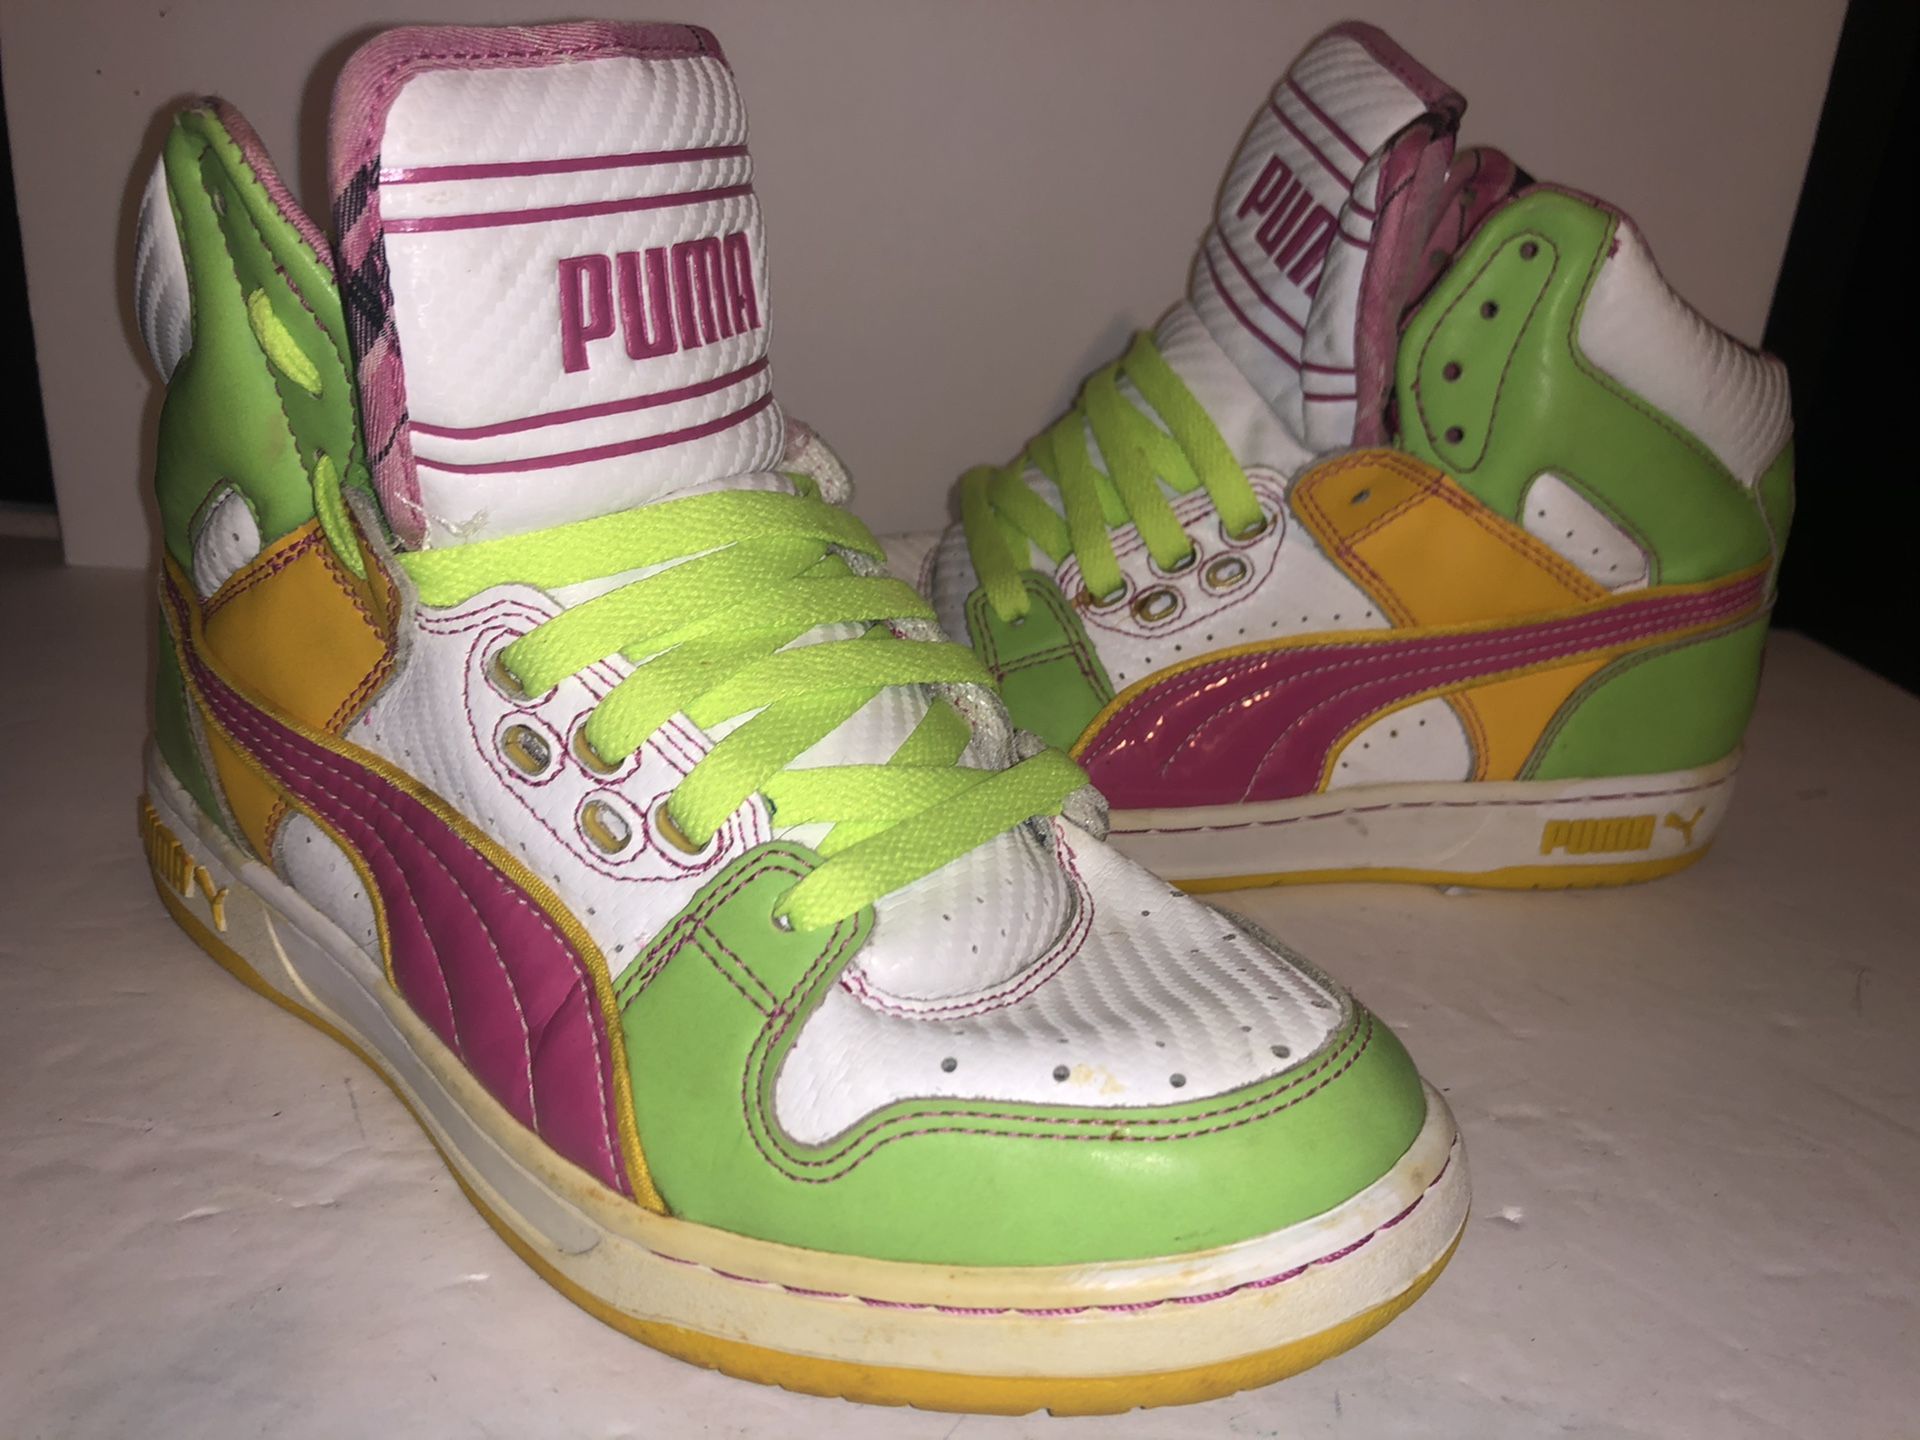 Puma high top sneakers size 6